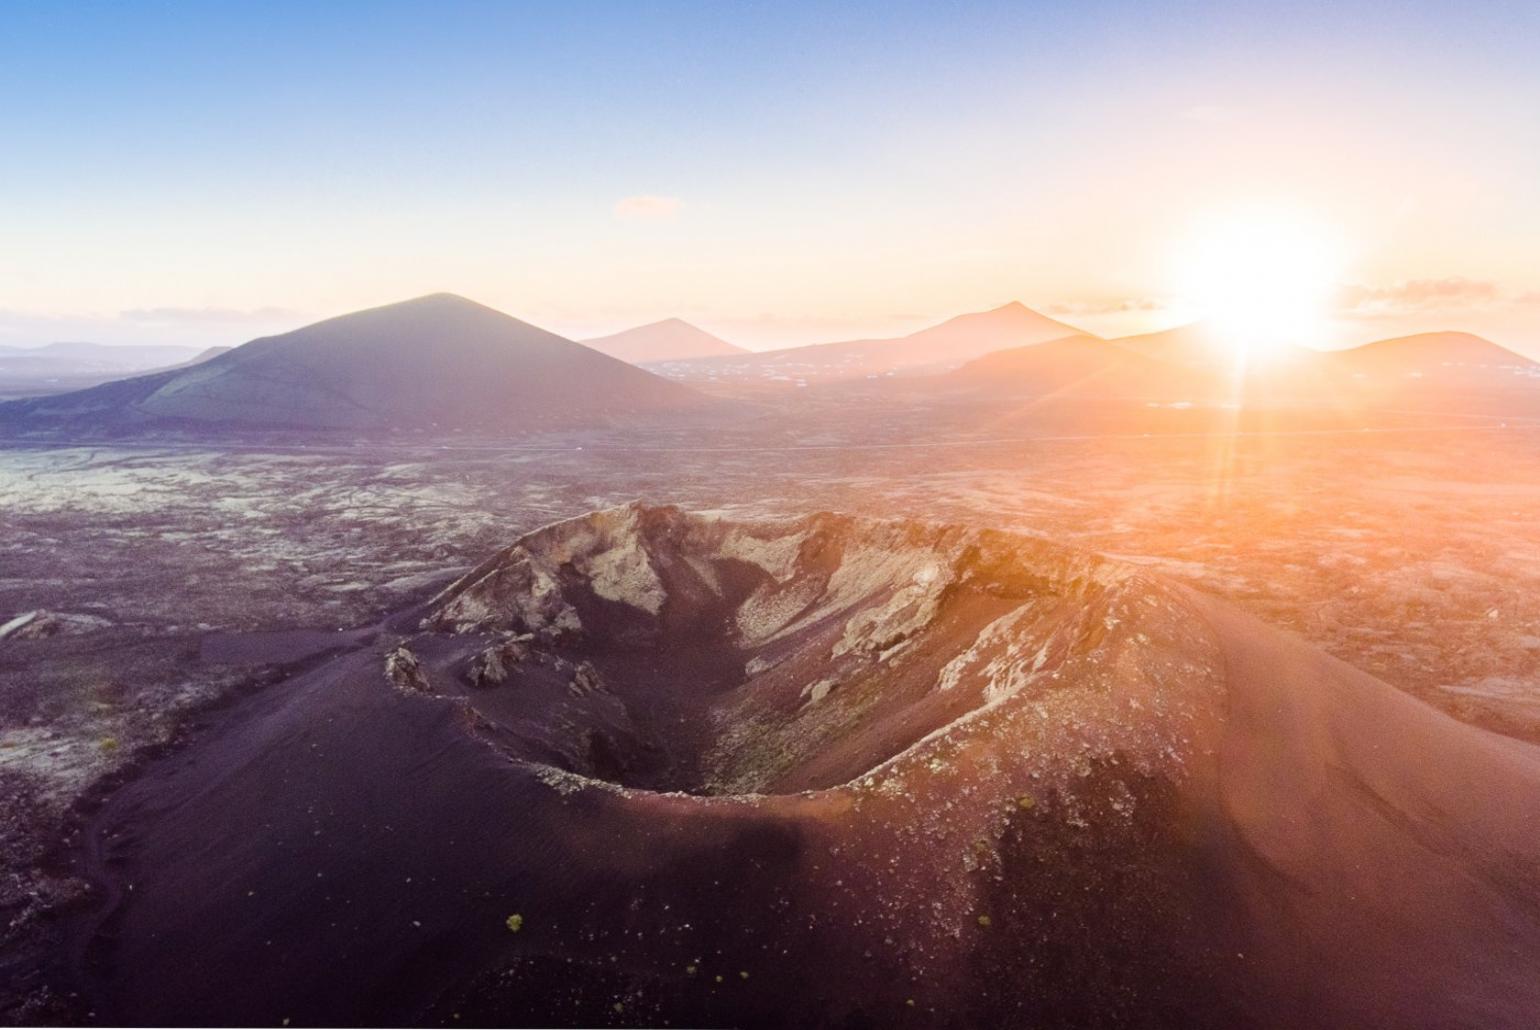 Sunrise over the nearby Volcan el Cuervo